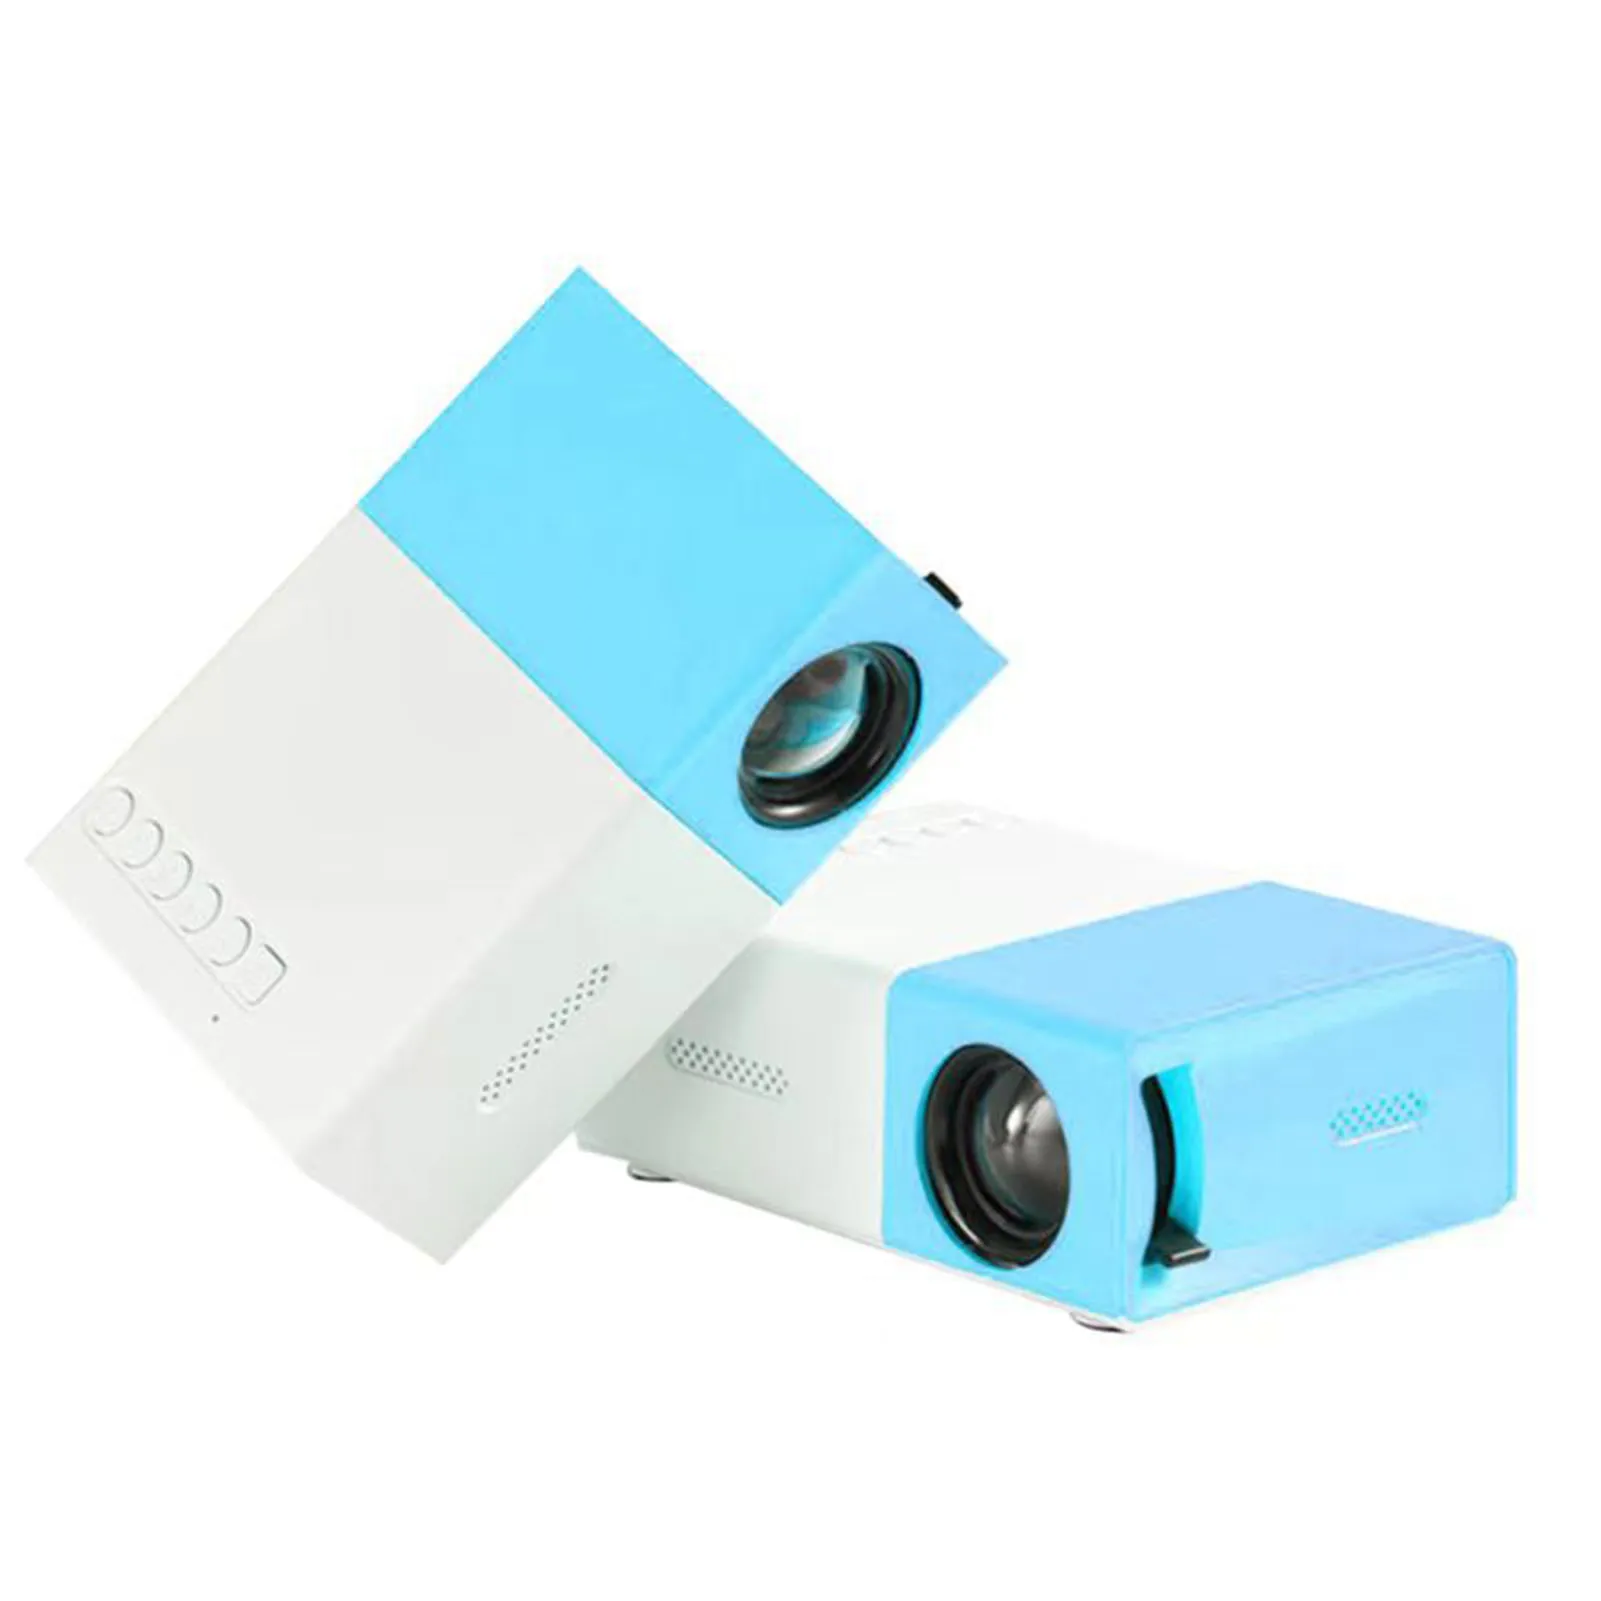 

Home Wired Mini Projector Support US/EU Plug Type Options & 23 Languages for Home Theater Headphone Speaker